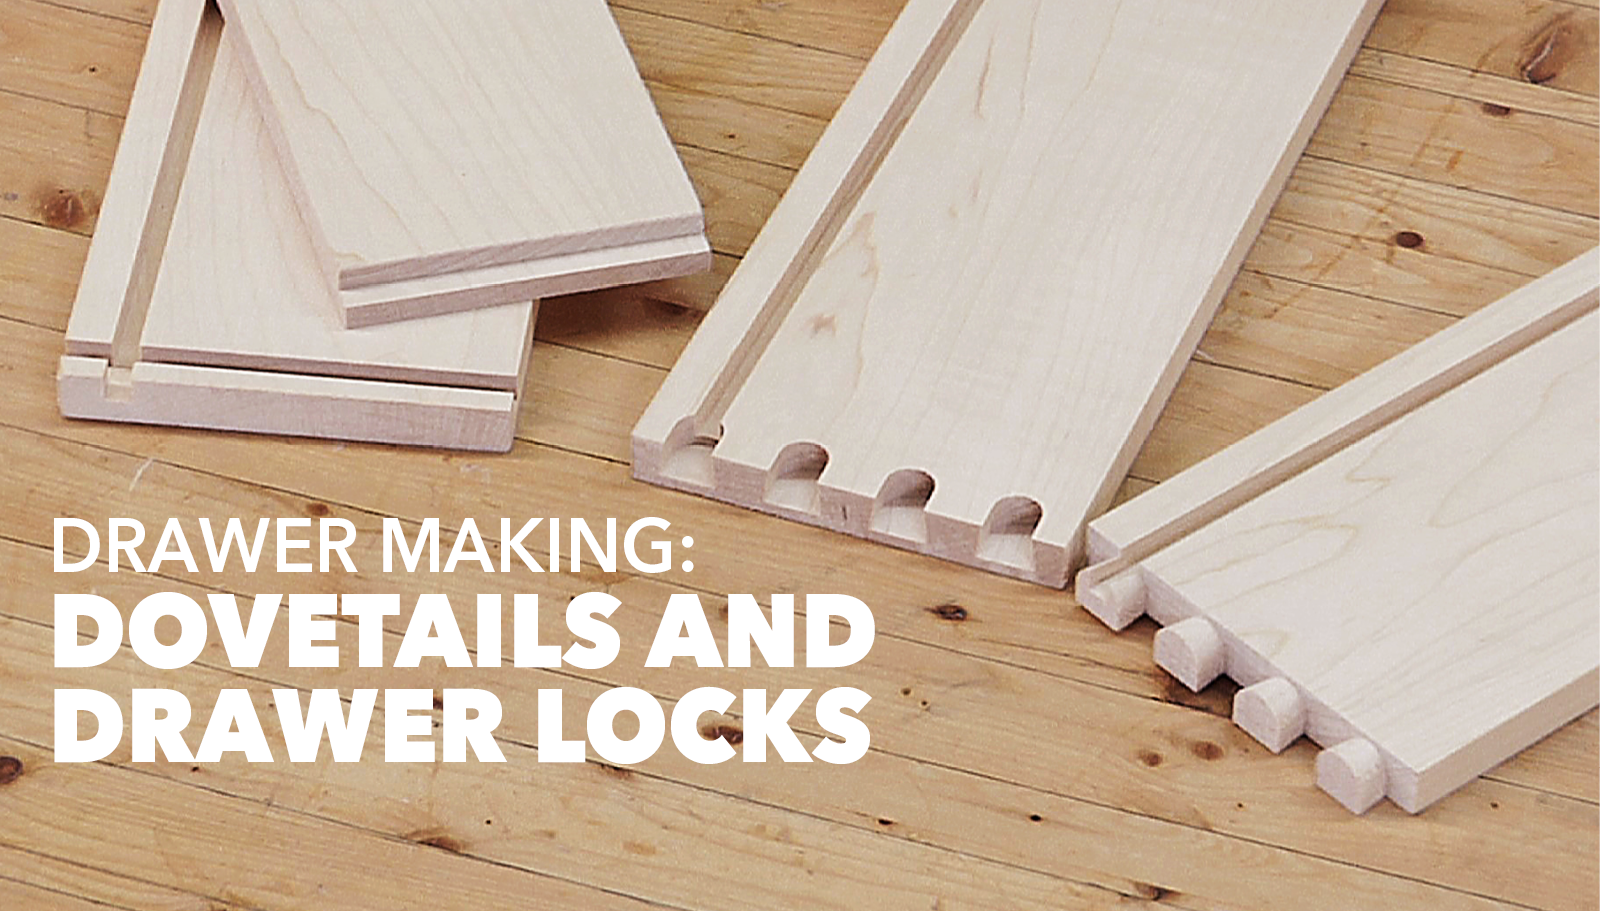 Making a drawer with dovetails and drawer locks